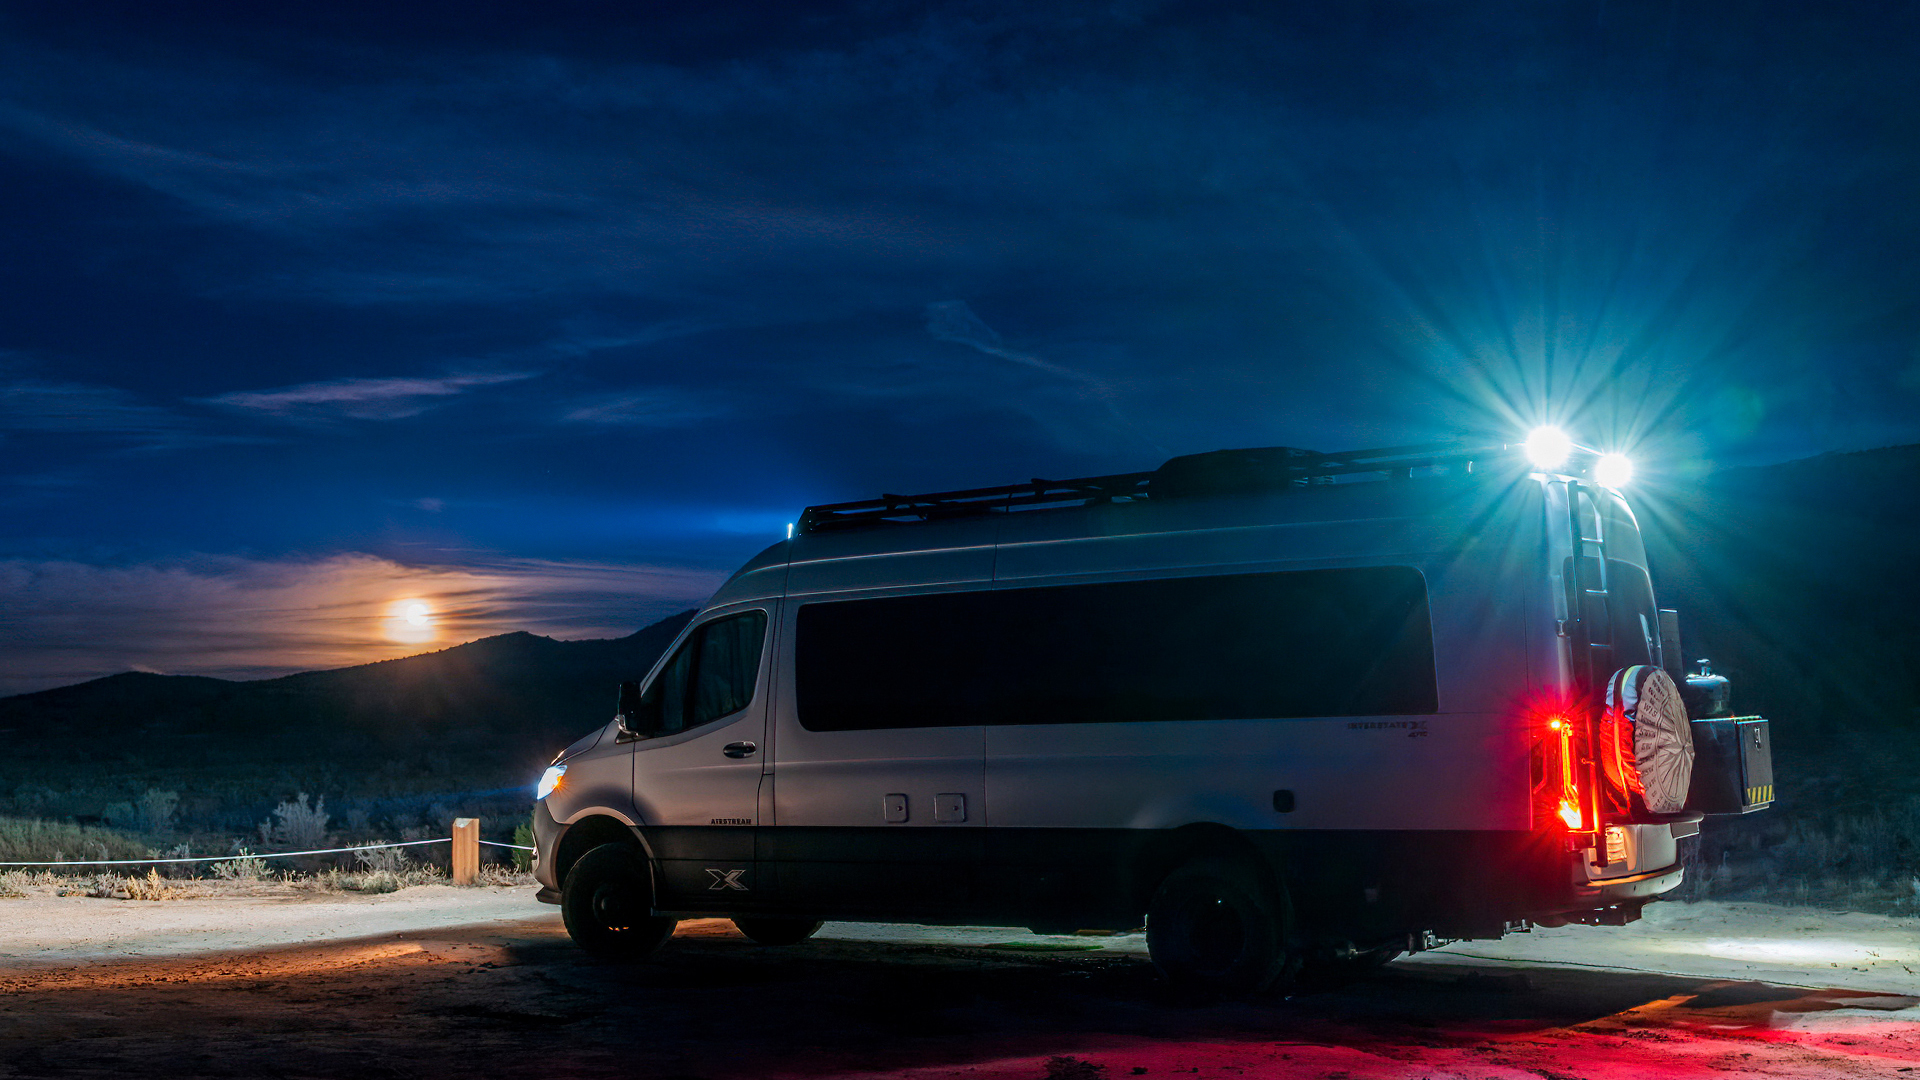 Airstream Interstate 24X sitting off the road in the dark at night with its lights on